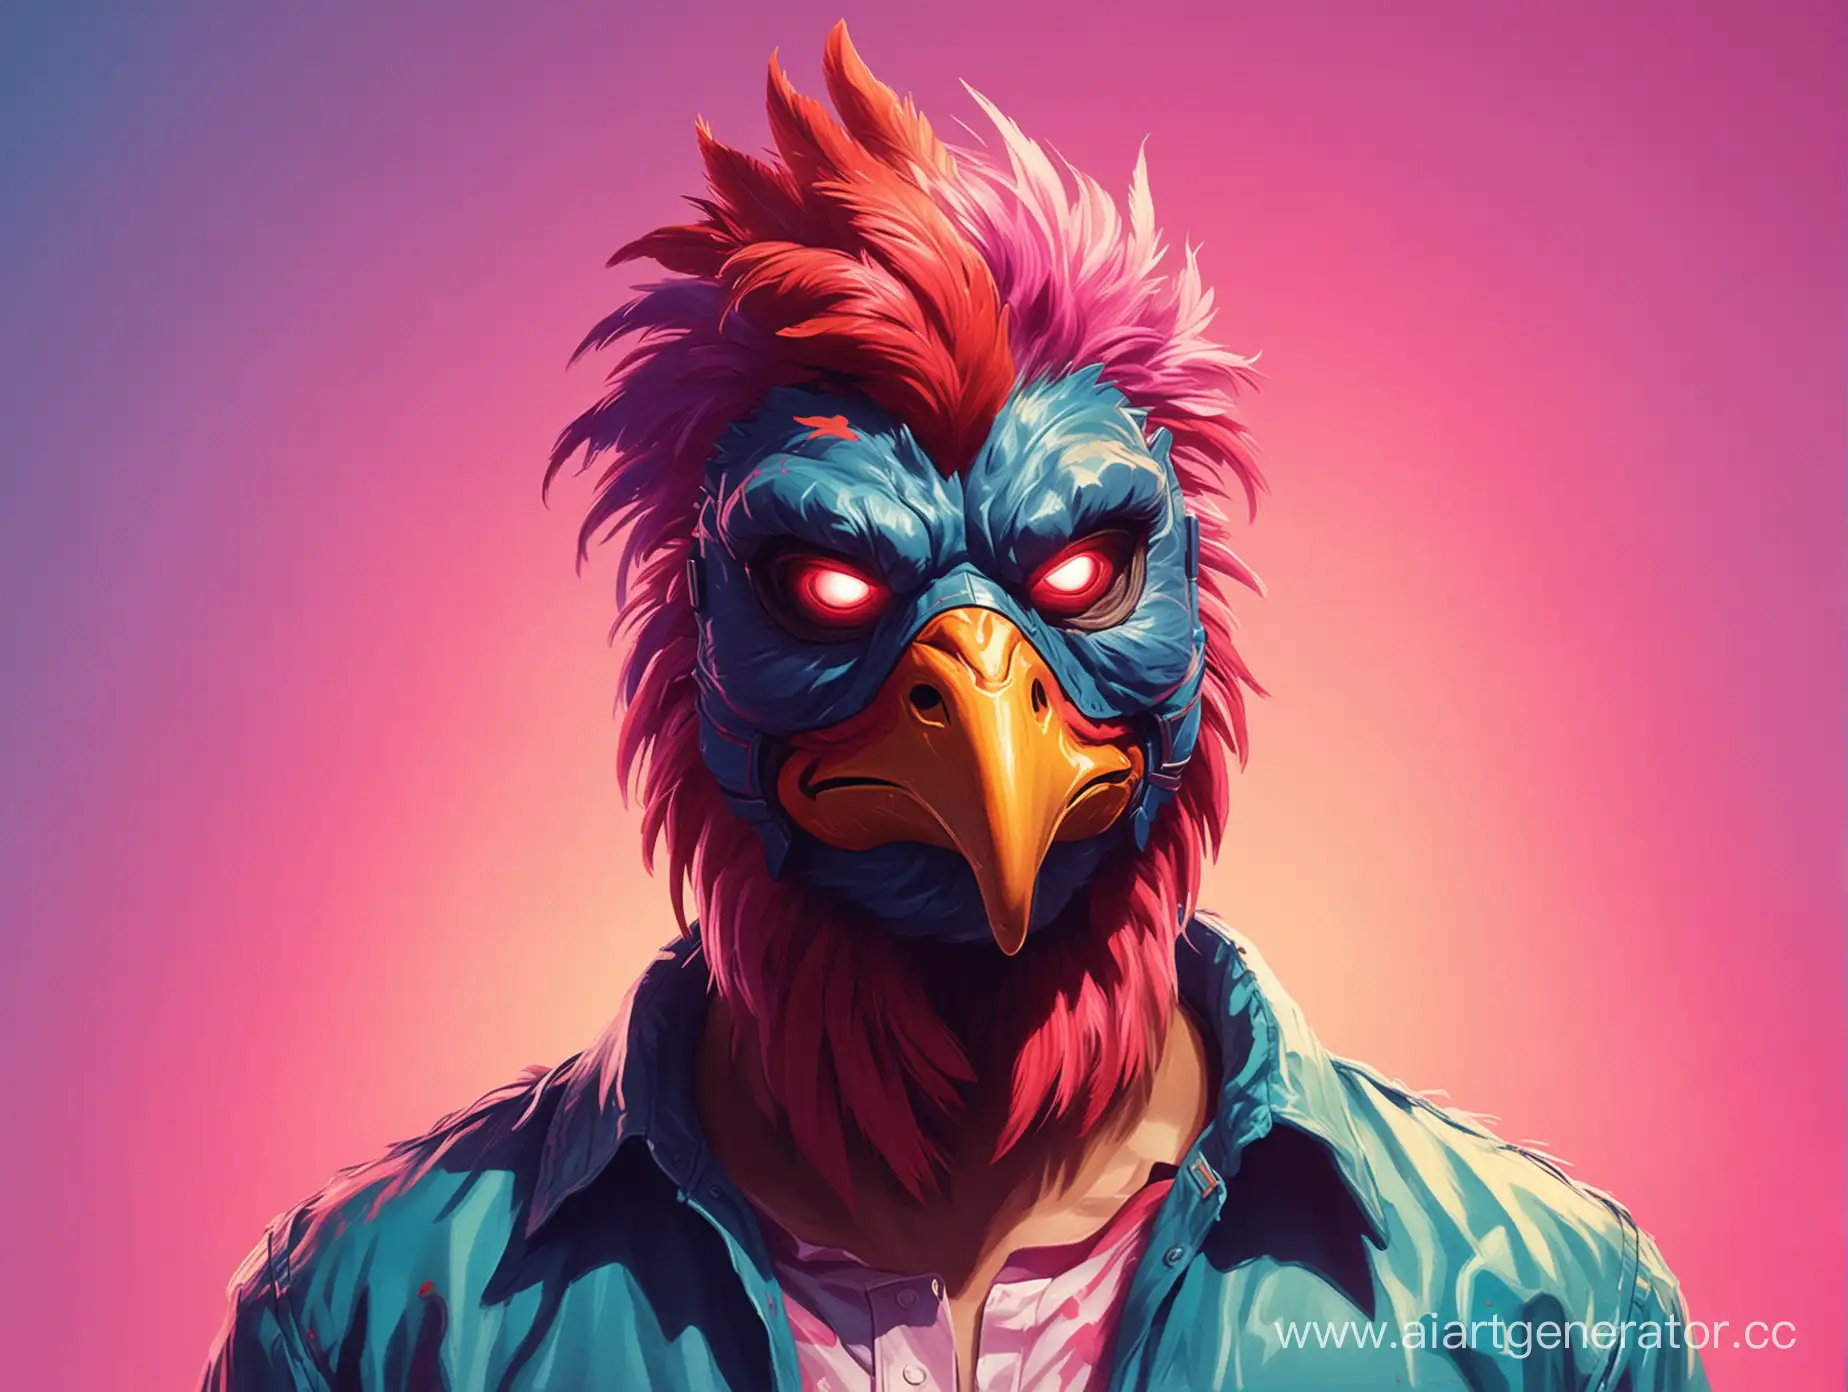 Retro-Rooster-Mask-Assassin-in-Oil-Paint-Style-Against-PinkBlue-Gradient-Background